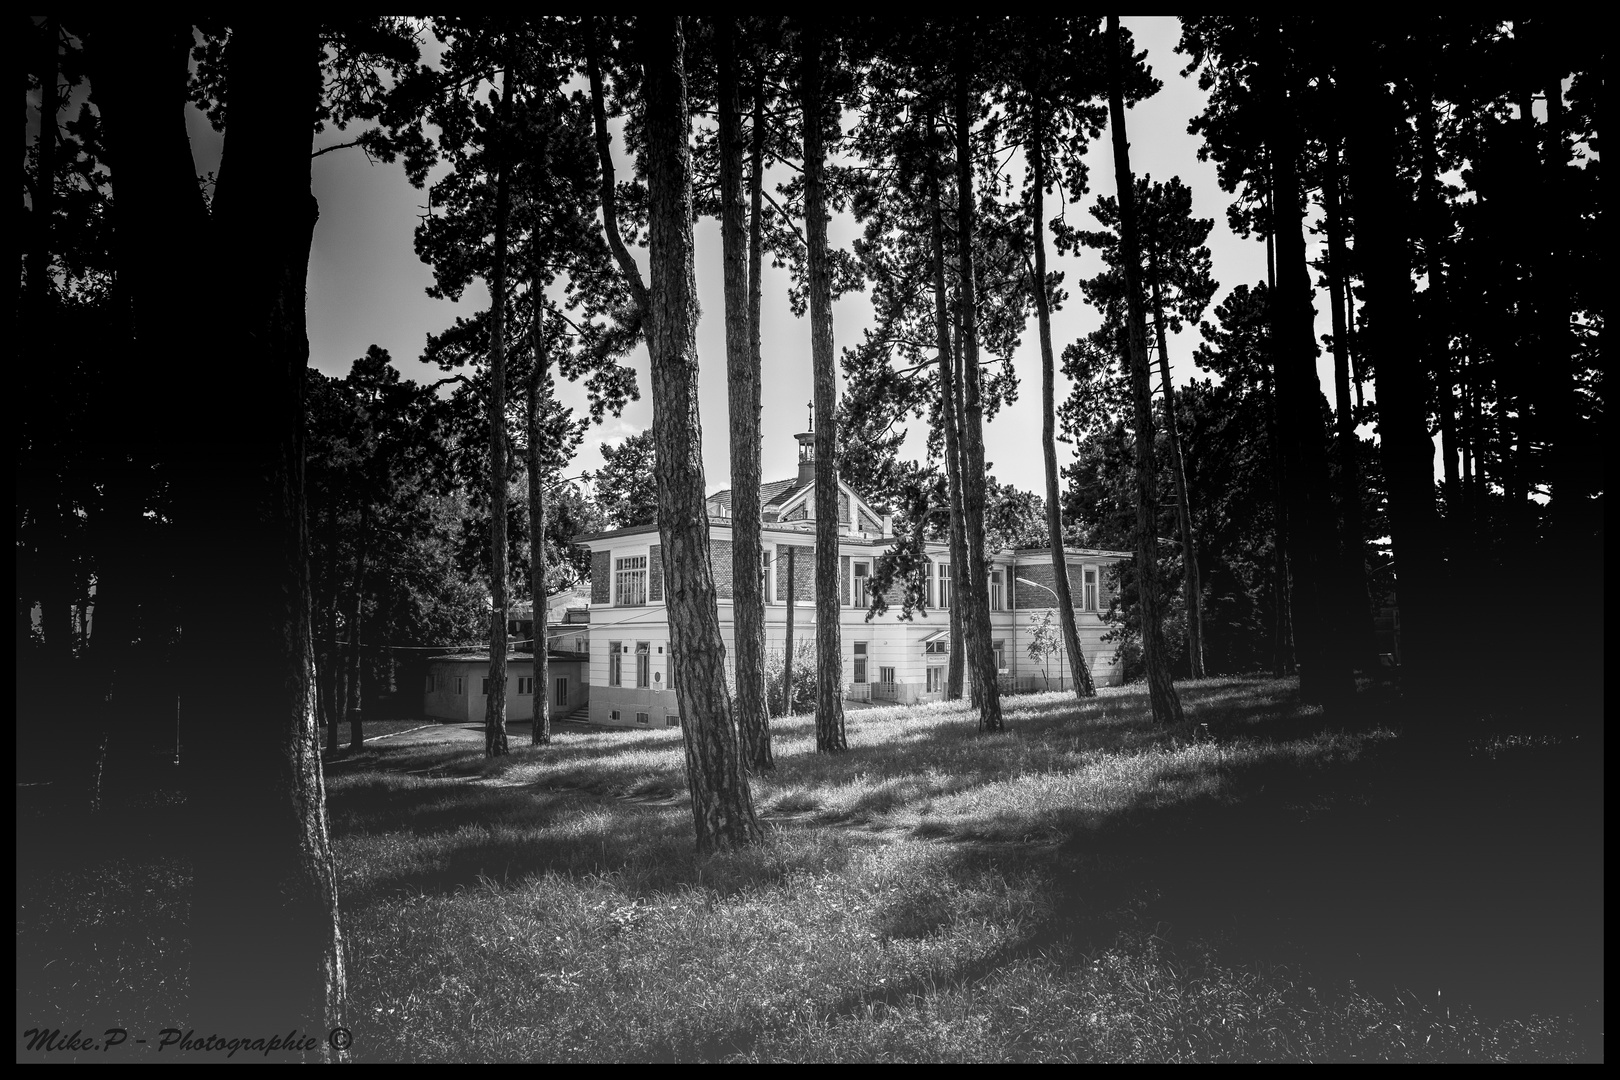 THE HOUSE BEHIND THE FOREST